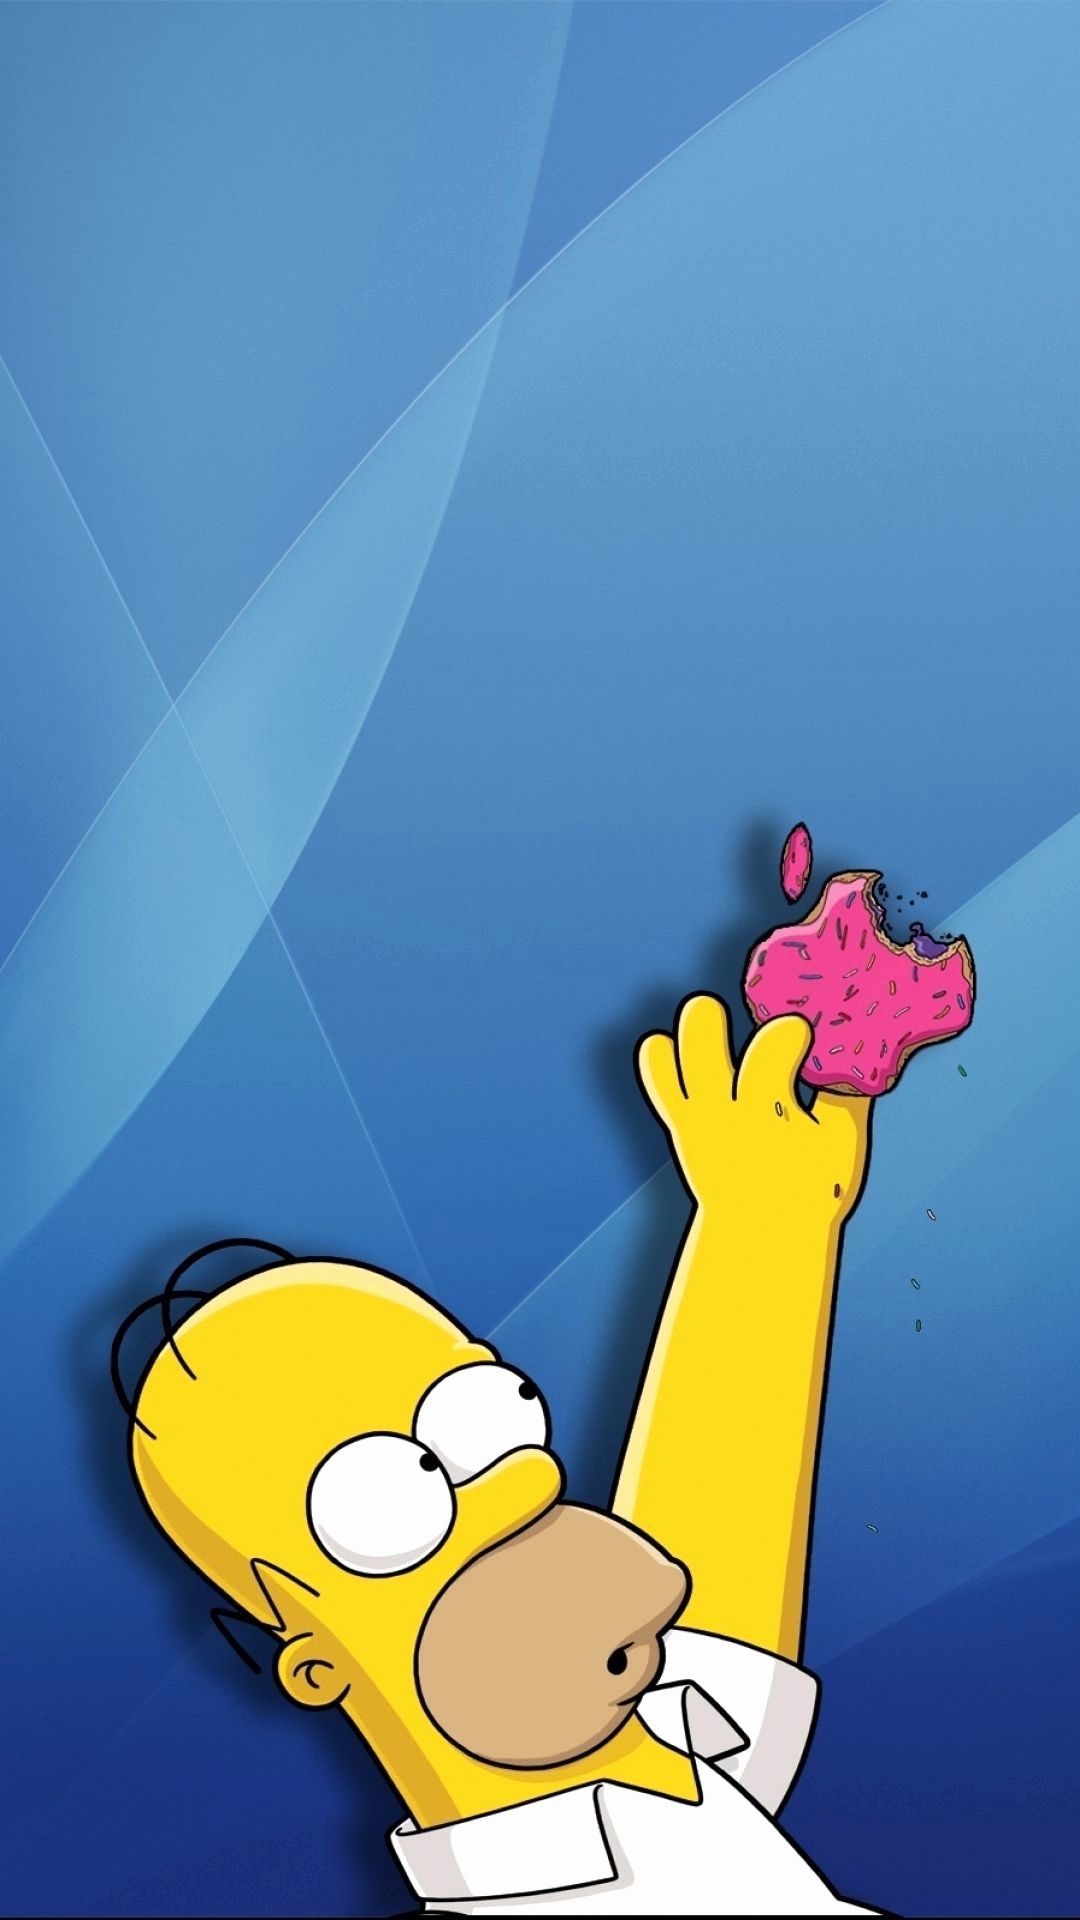 Wallpaper ID 1813795  The Simpsons Homer Simpson 4K free download